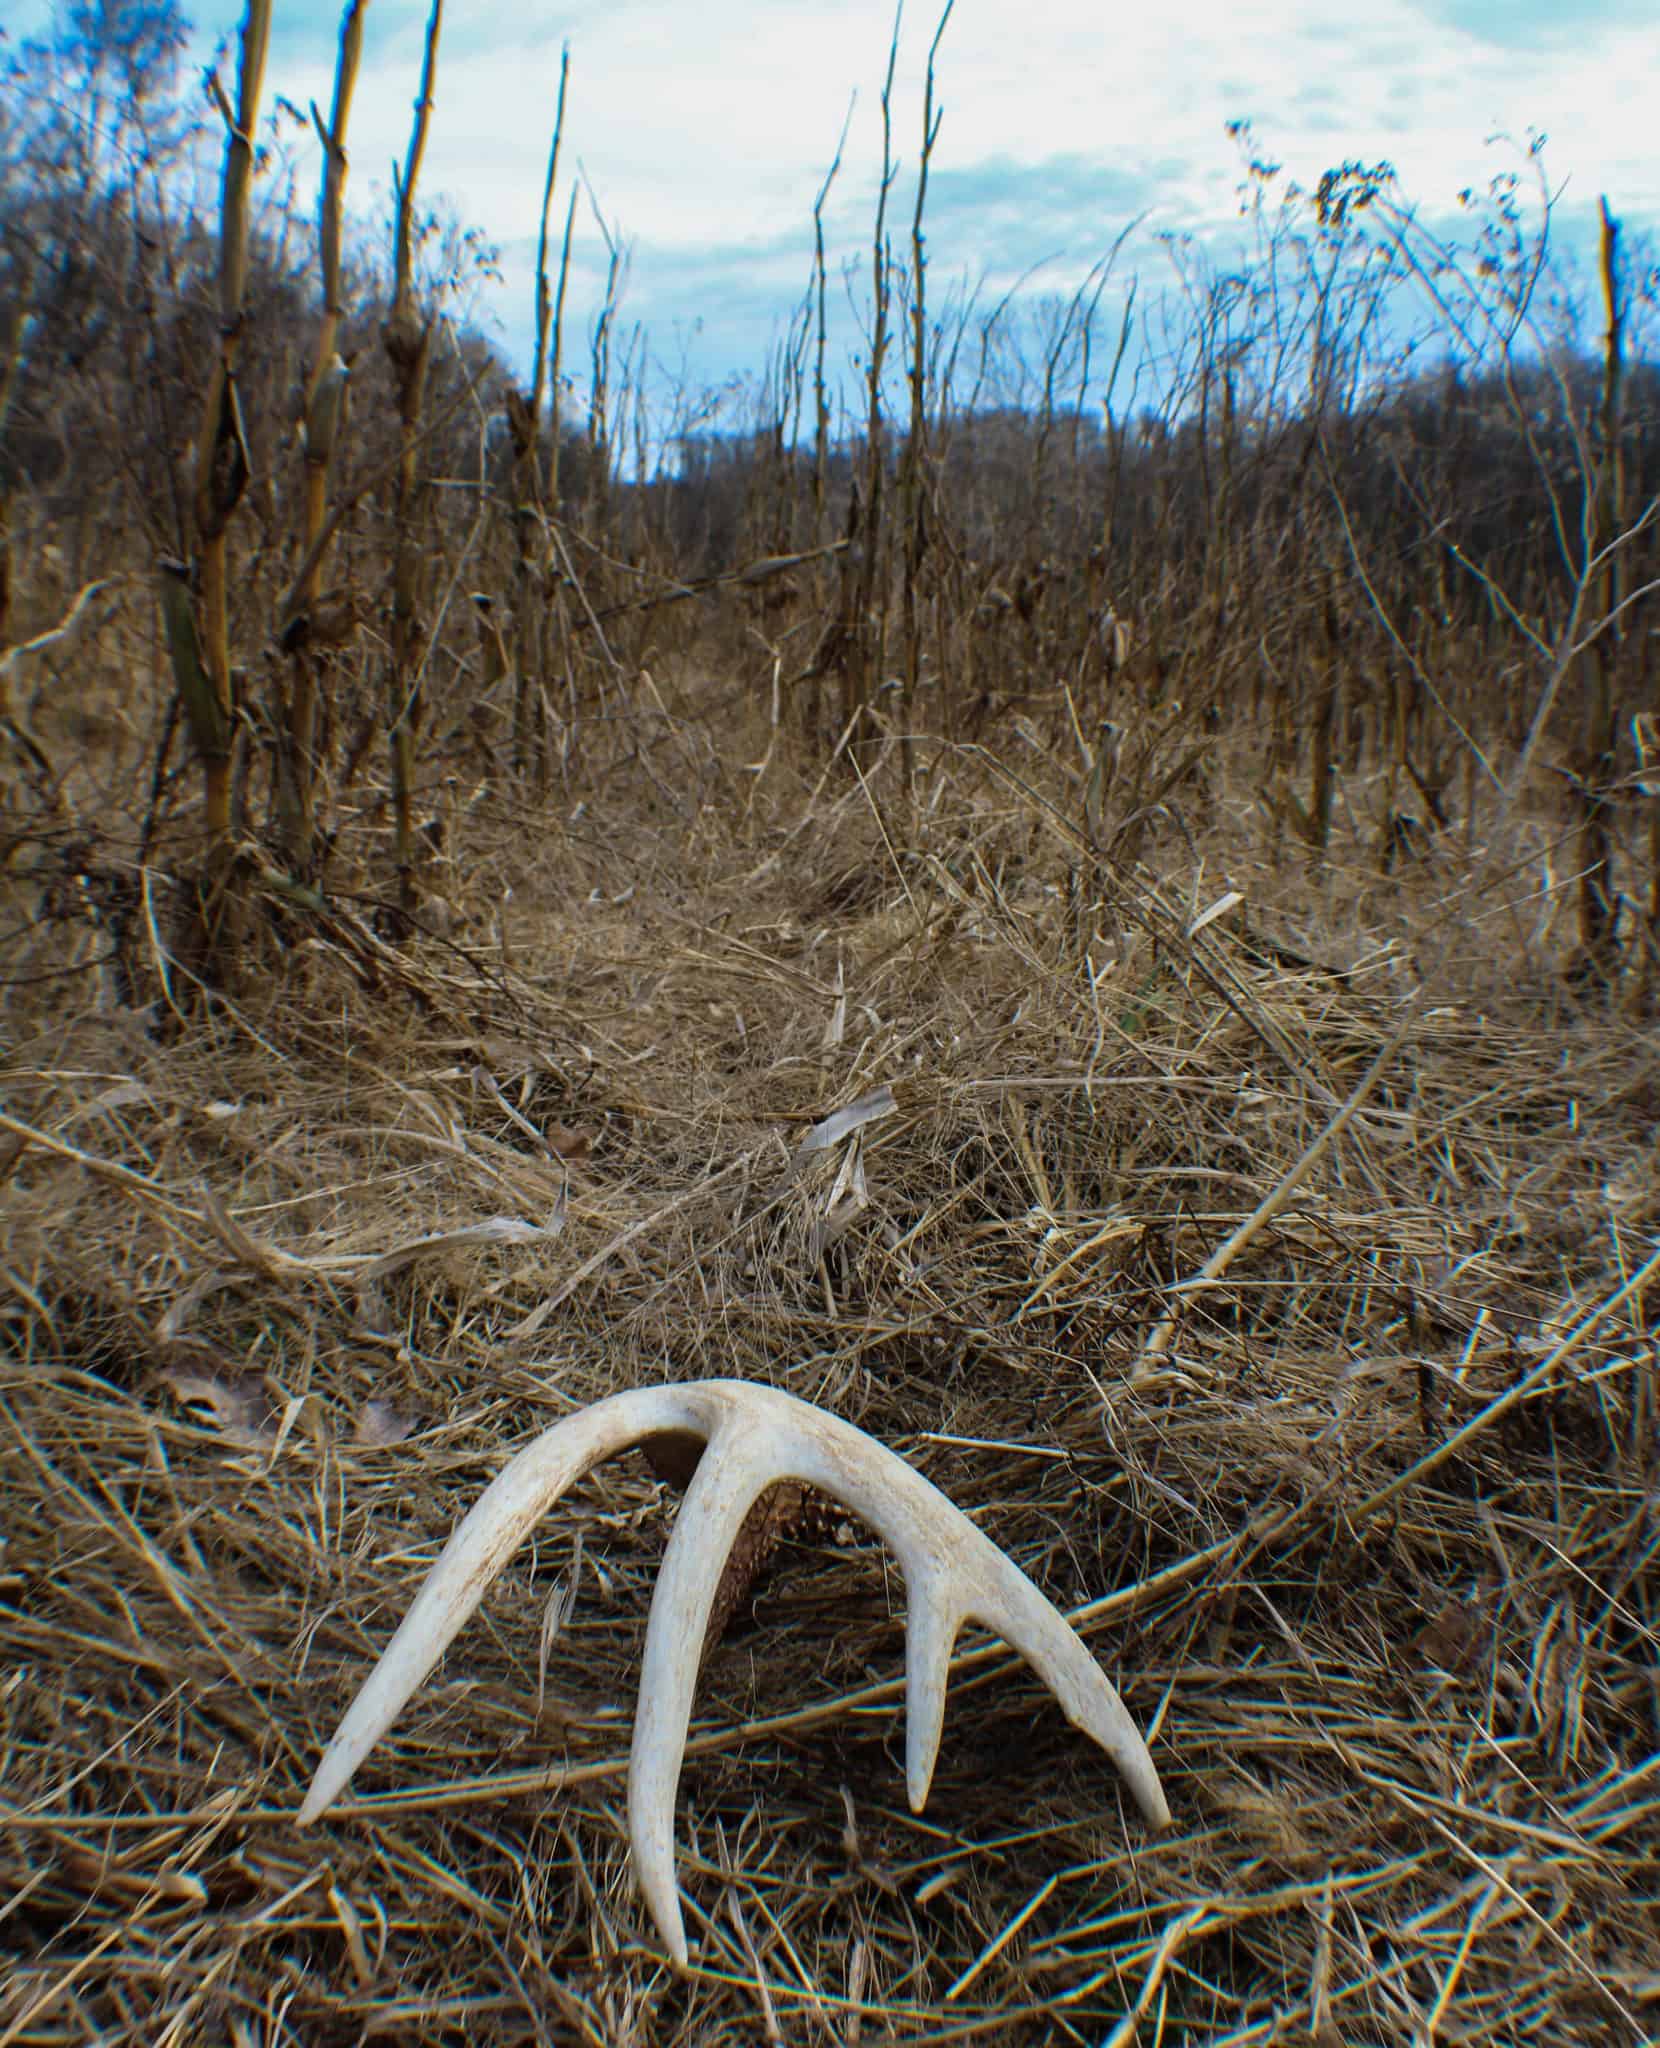 Shed hunting in corn fields